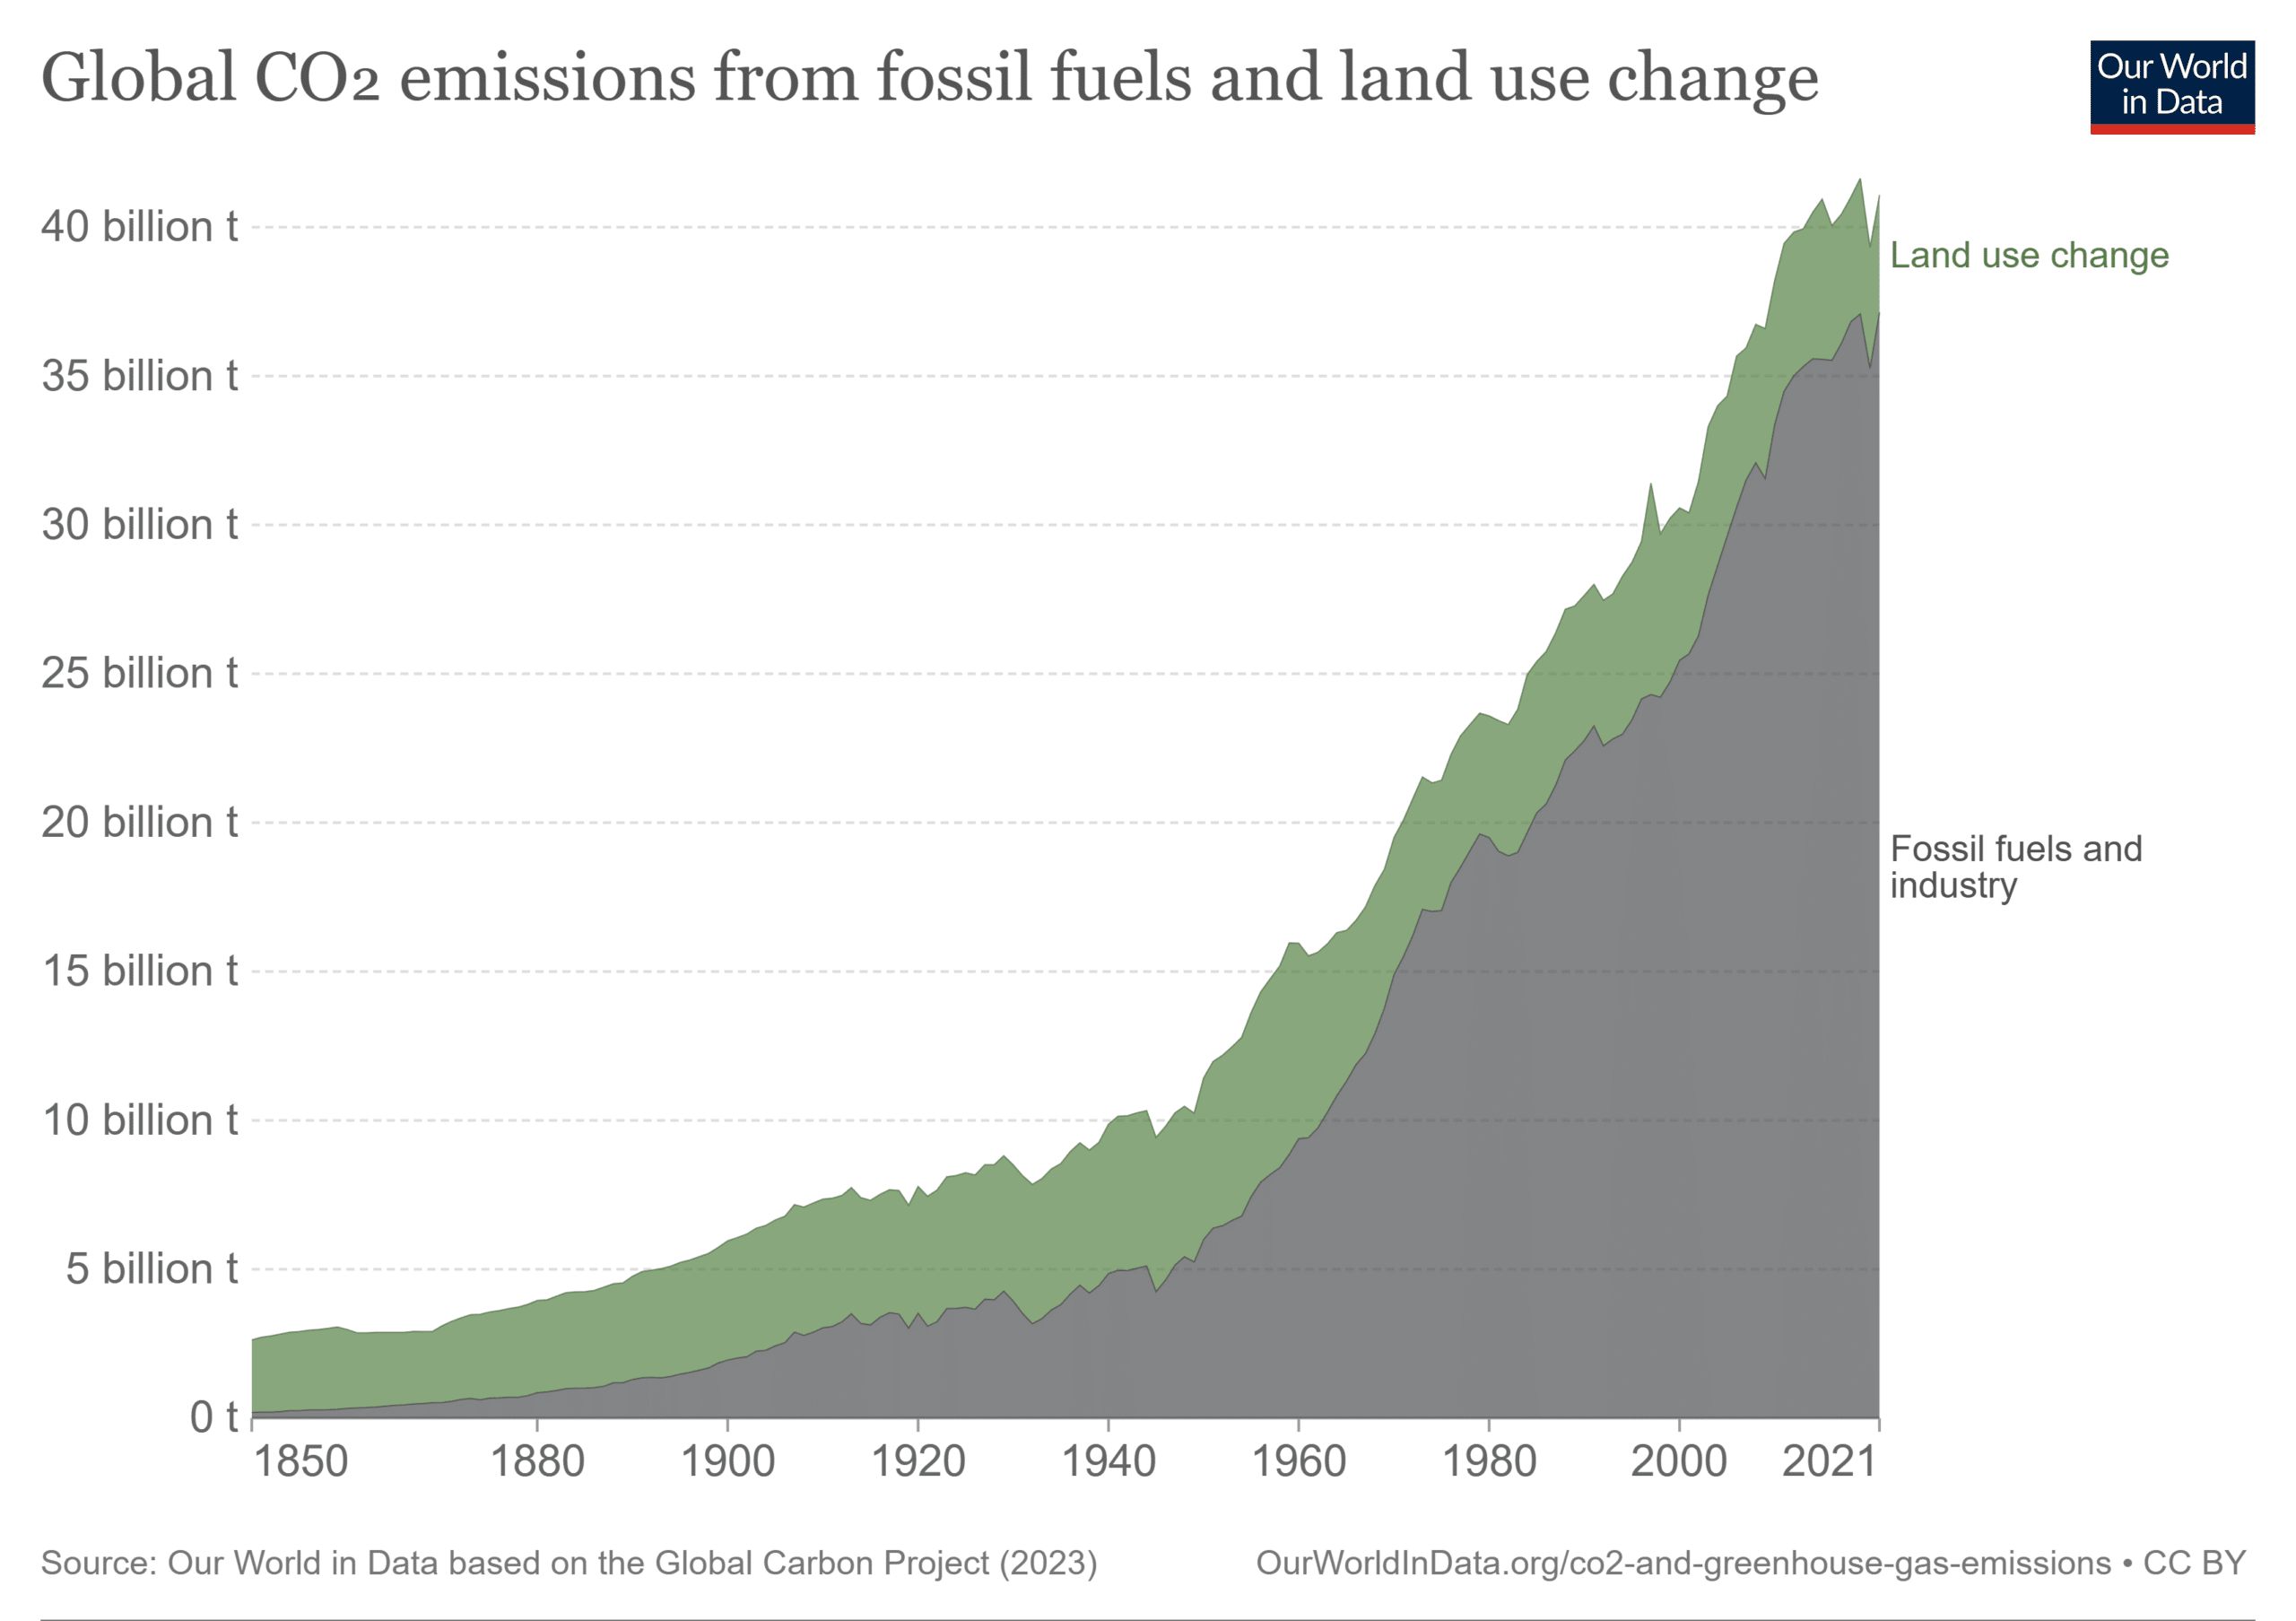 Carbon dioxide (CO₂) emissions from fossil fuels and industry. Land use change is not included